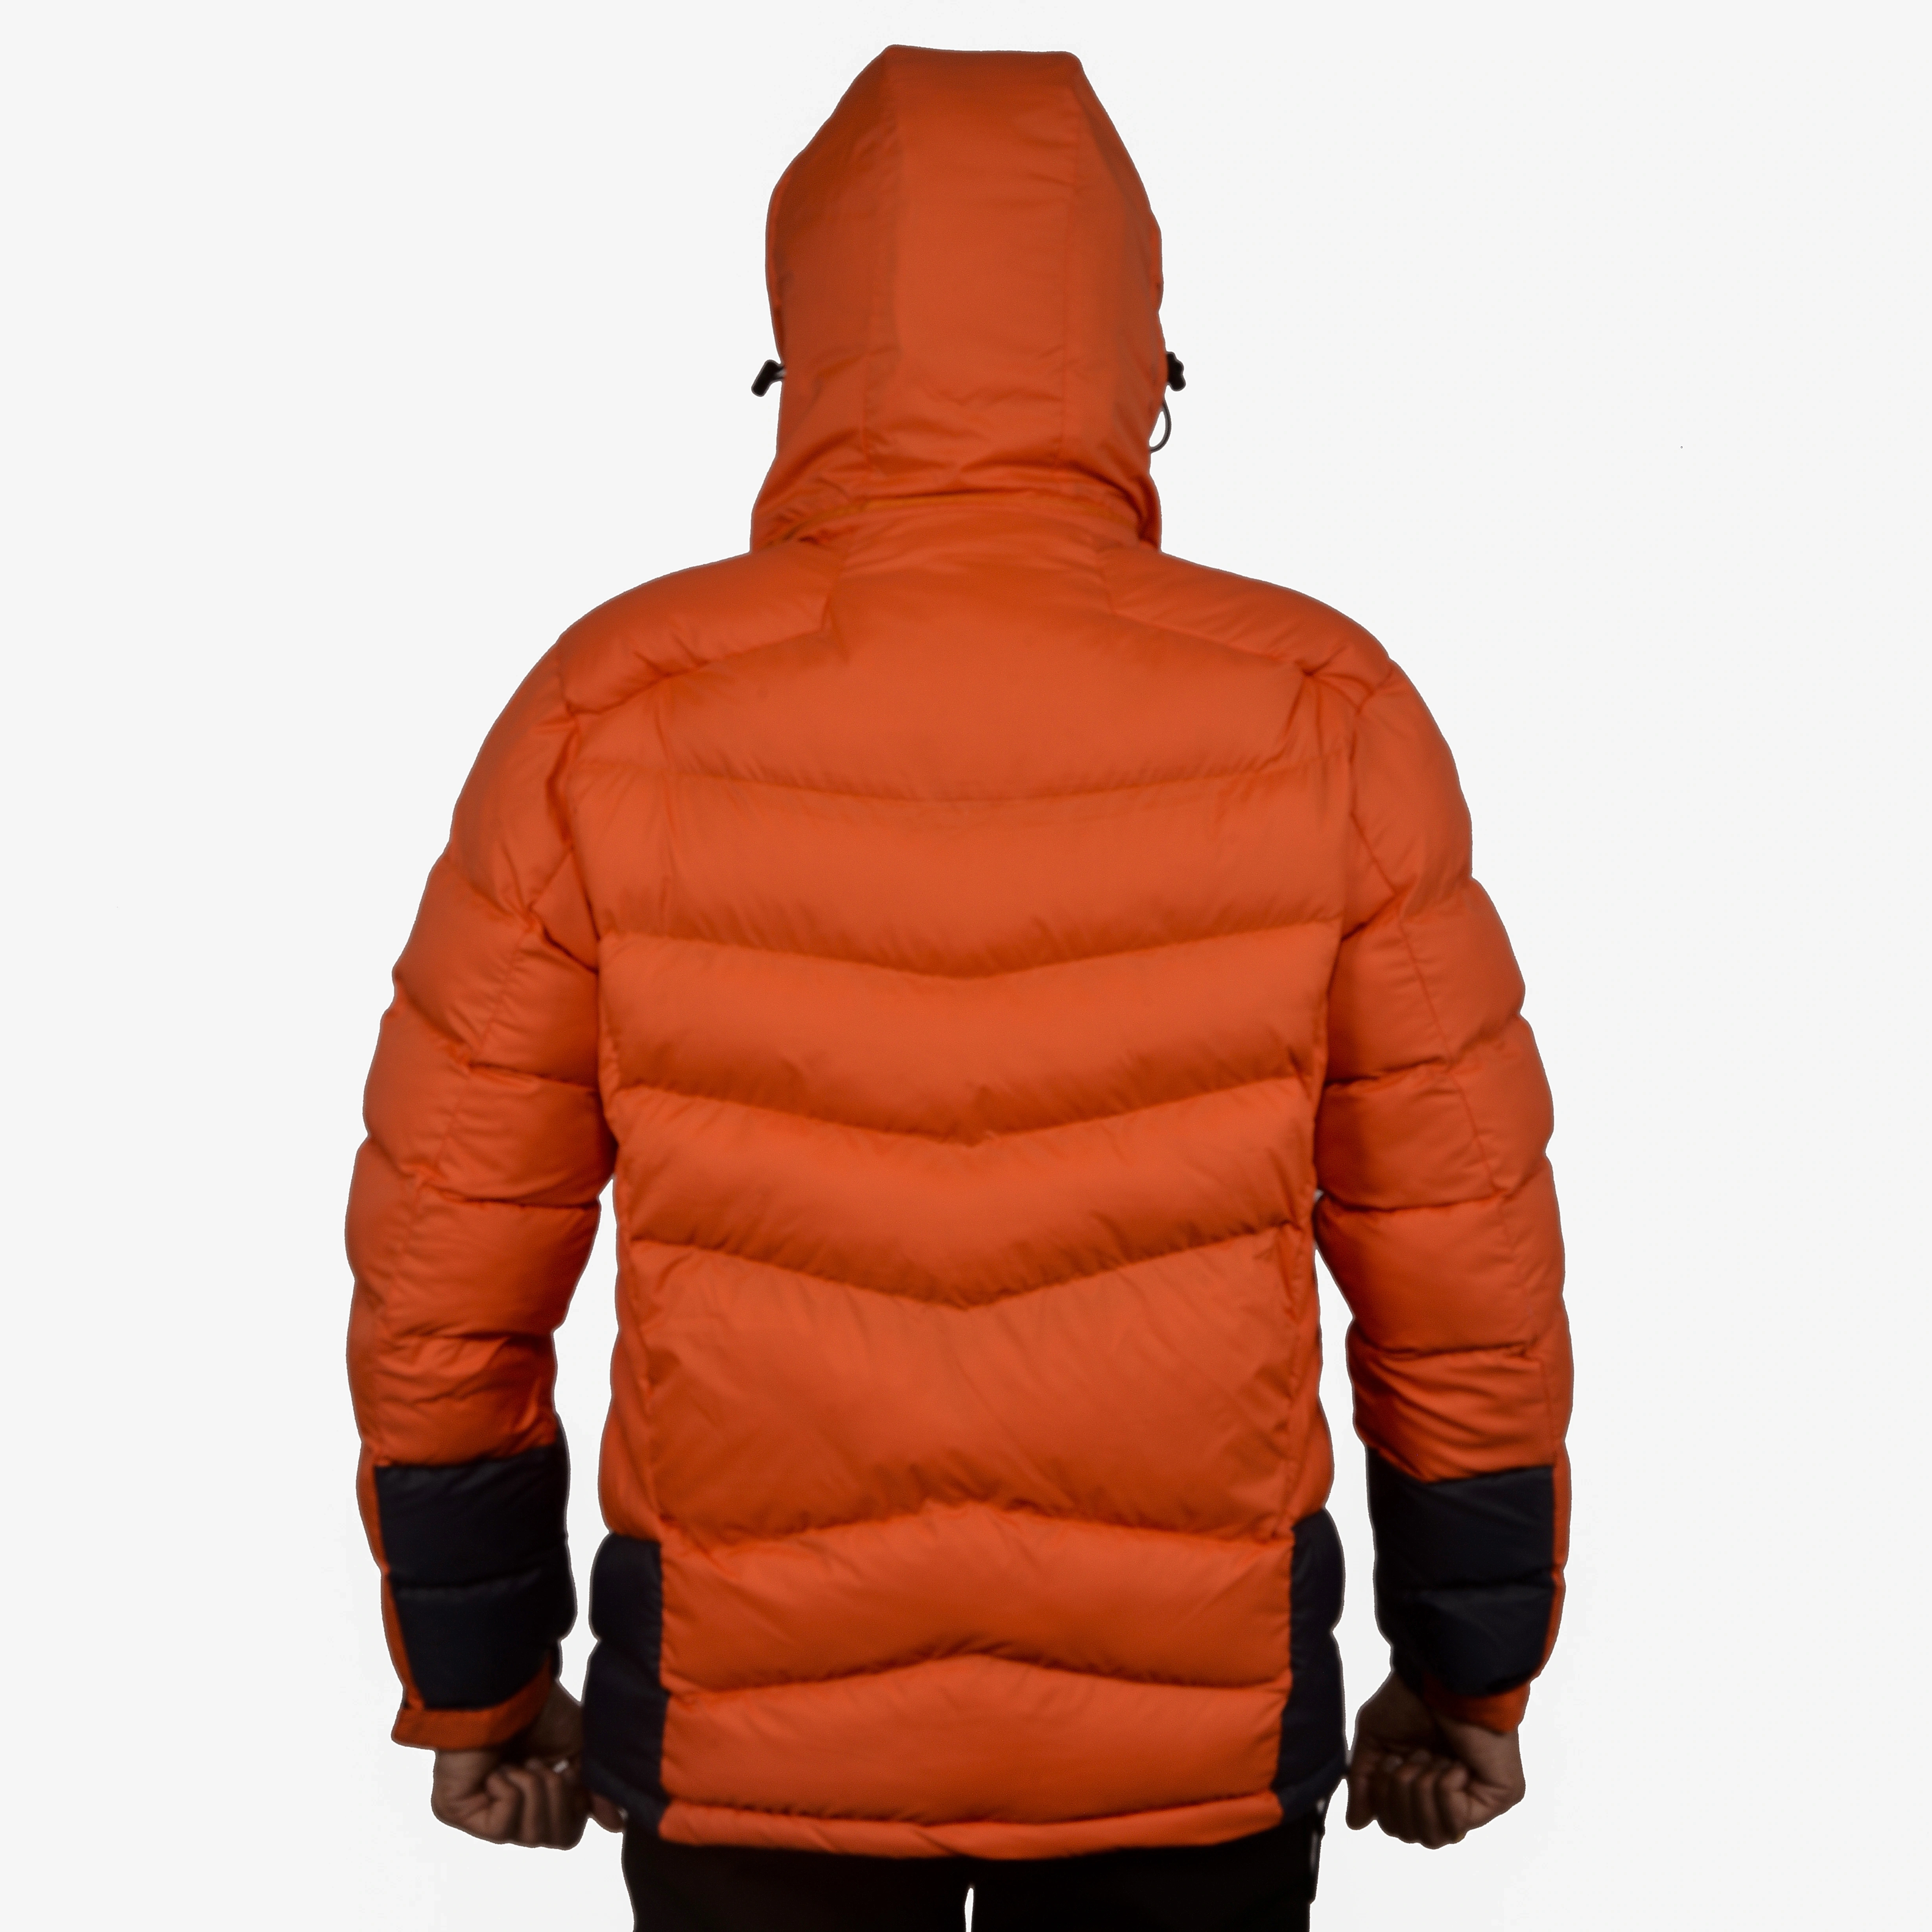 K2 Survivor Down Jacket for Men: Stylized Functionality for Extreme Cold Weather Expeditions (Up to -20°C)-XXL-Orange-3